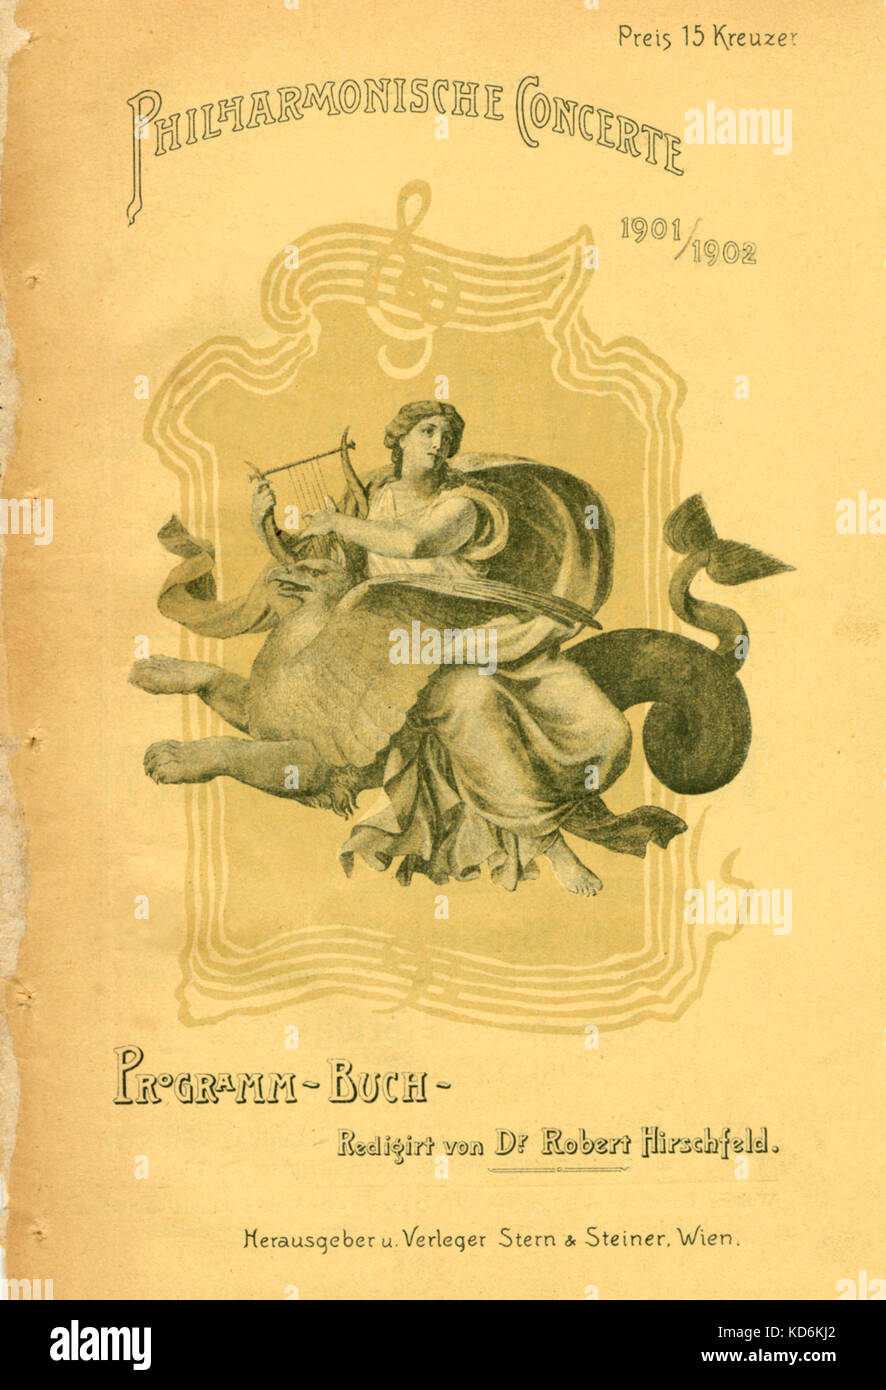 Programme cover for Philharmonische Concerte (Philharmonic Concert) in Grossen Saale of Gesellschaft der Musikfreunde, Vienna on 12th january 1902 for performance of Mahler's 4th Symphony conducted by Joseph Hellmesberger. With M. Michalek singing. Stock Photo